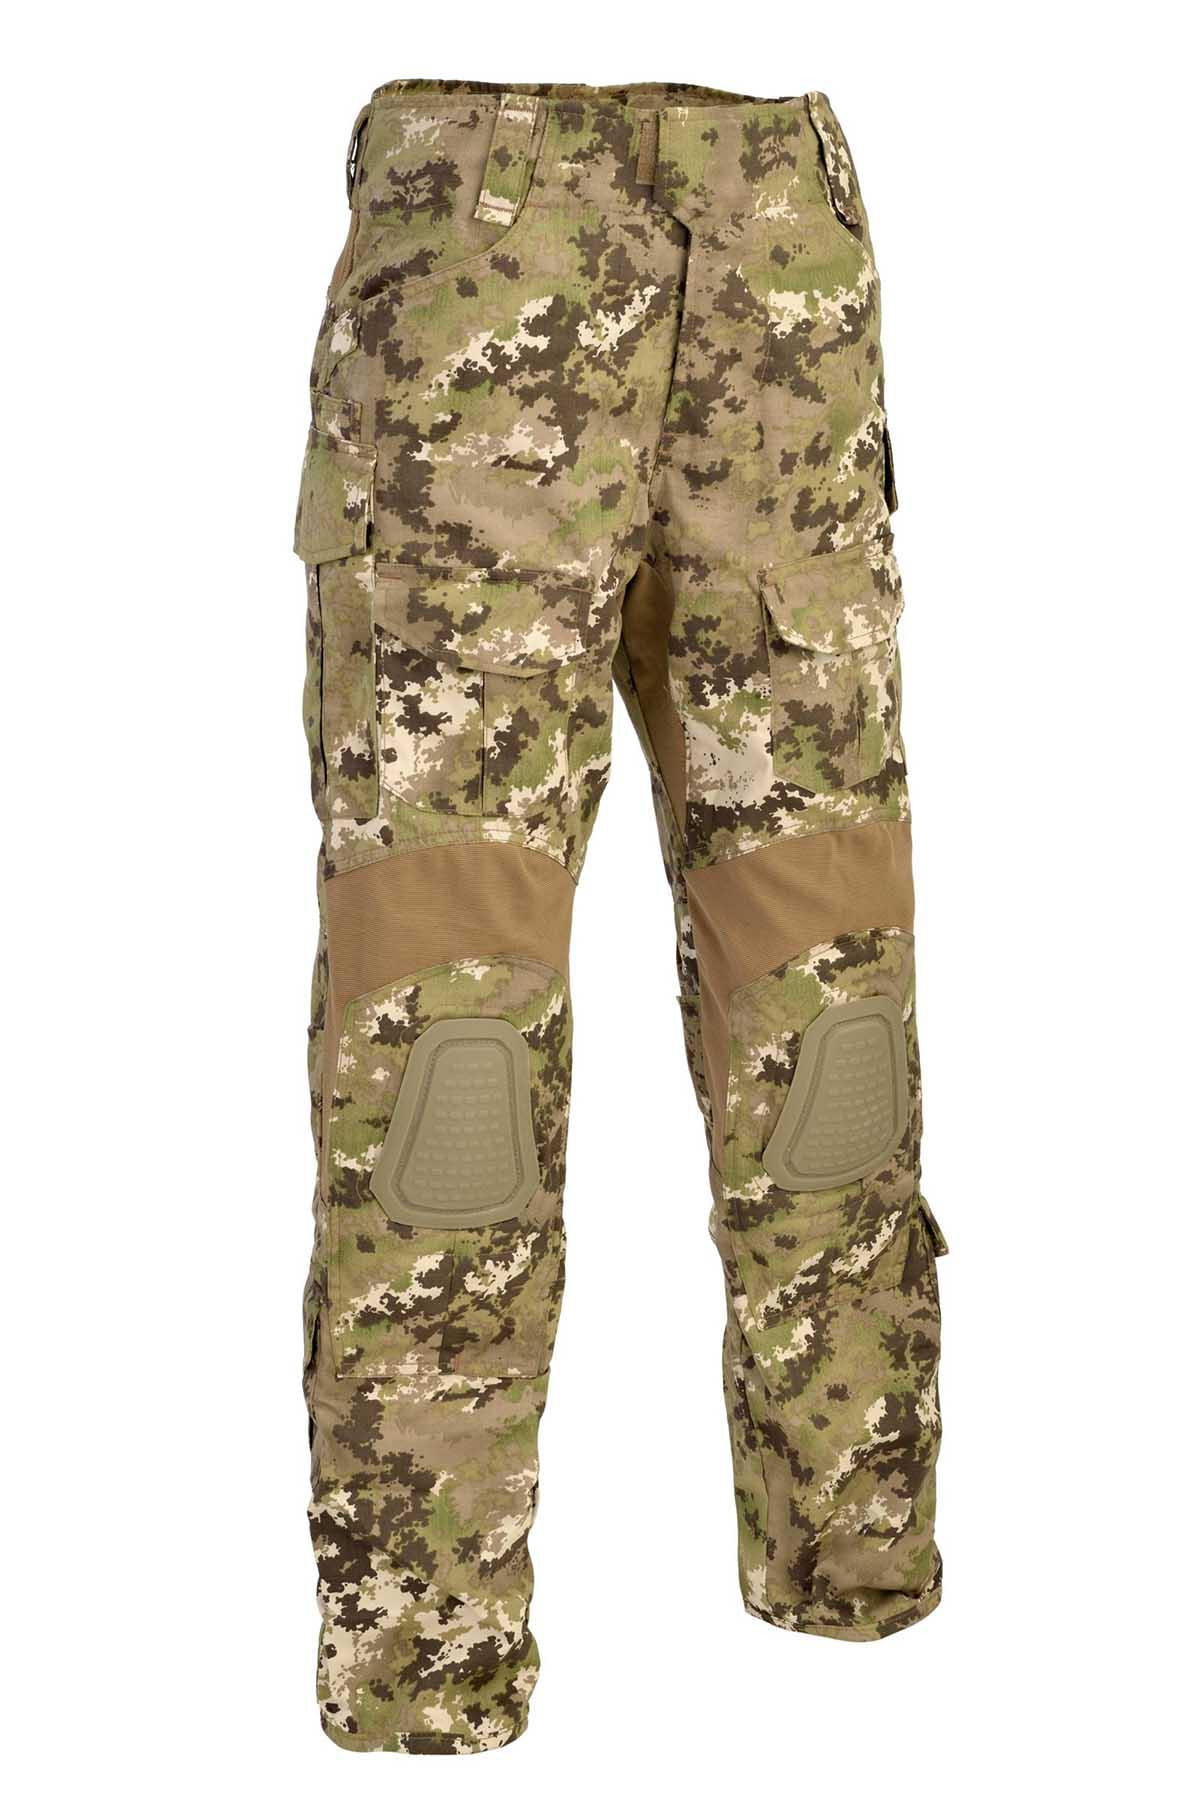 multicam pants with knee pads